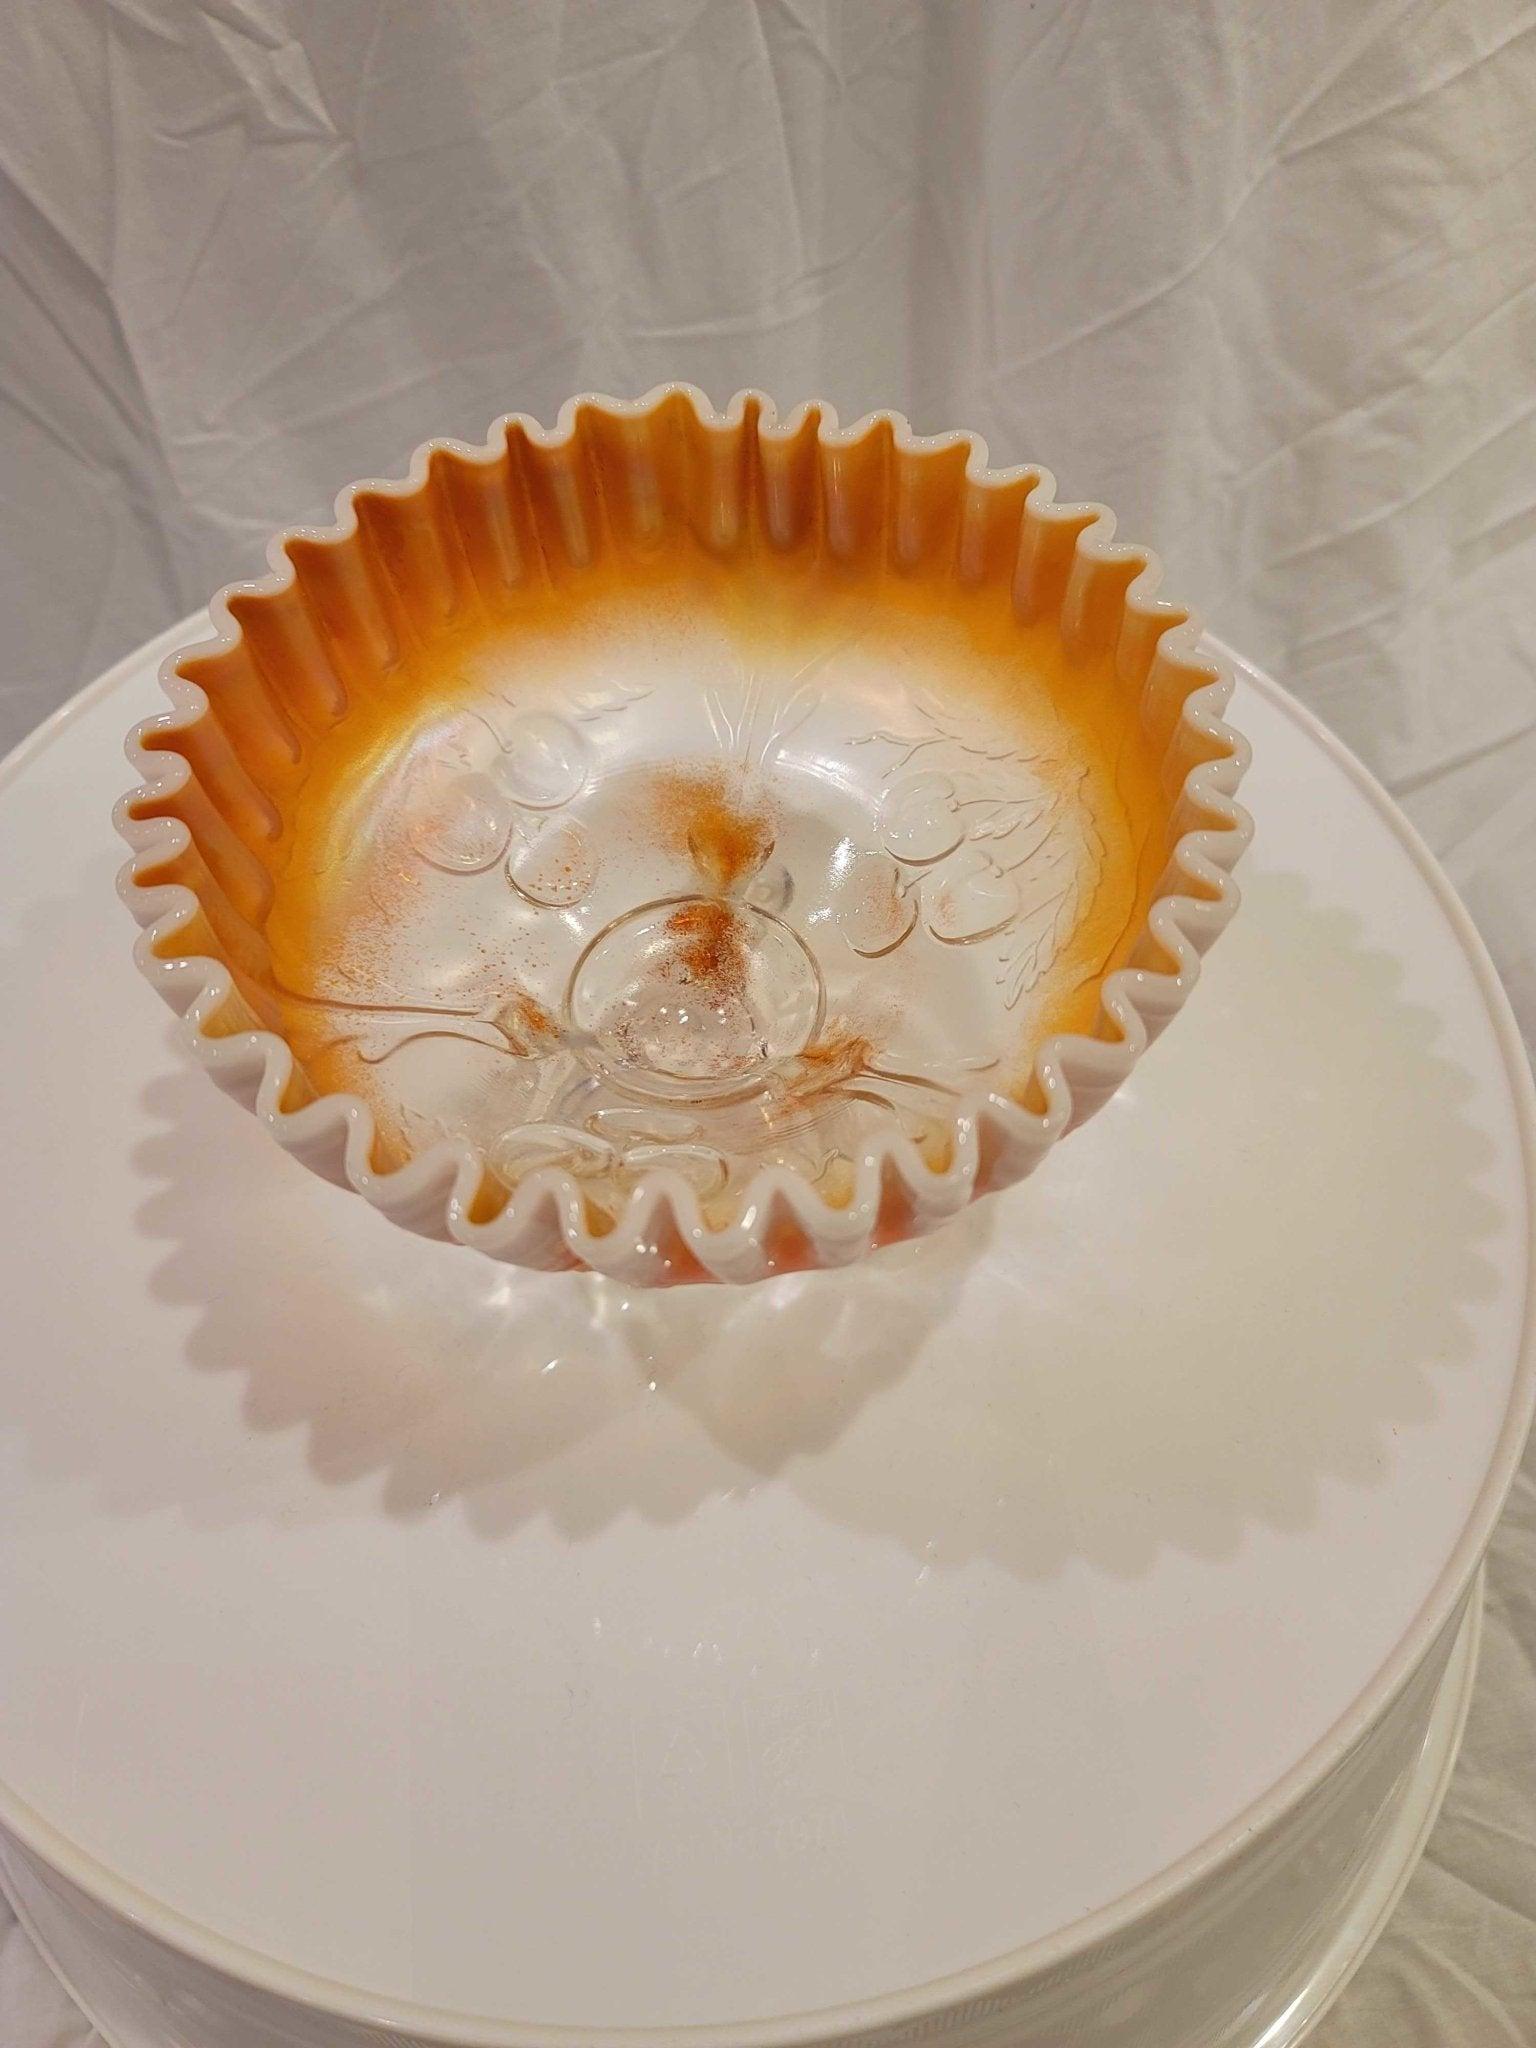 Unique white and orange (Peach Glass) antique folded dish that sits upon 3 legs. There are raised glass details of cherries on the underside that show through to the inside bottom of the bowl. Flawless.

Formed to a 6-3/4